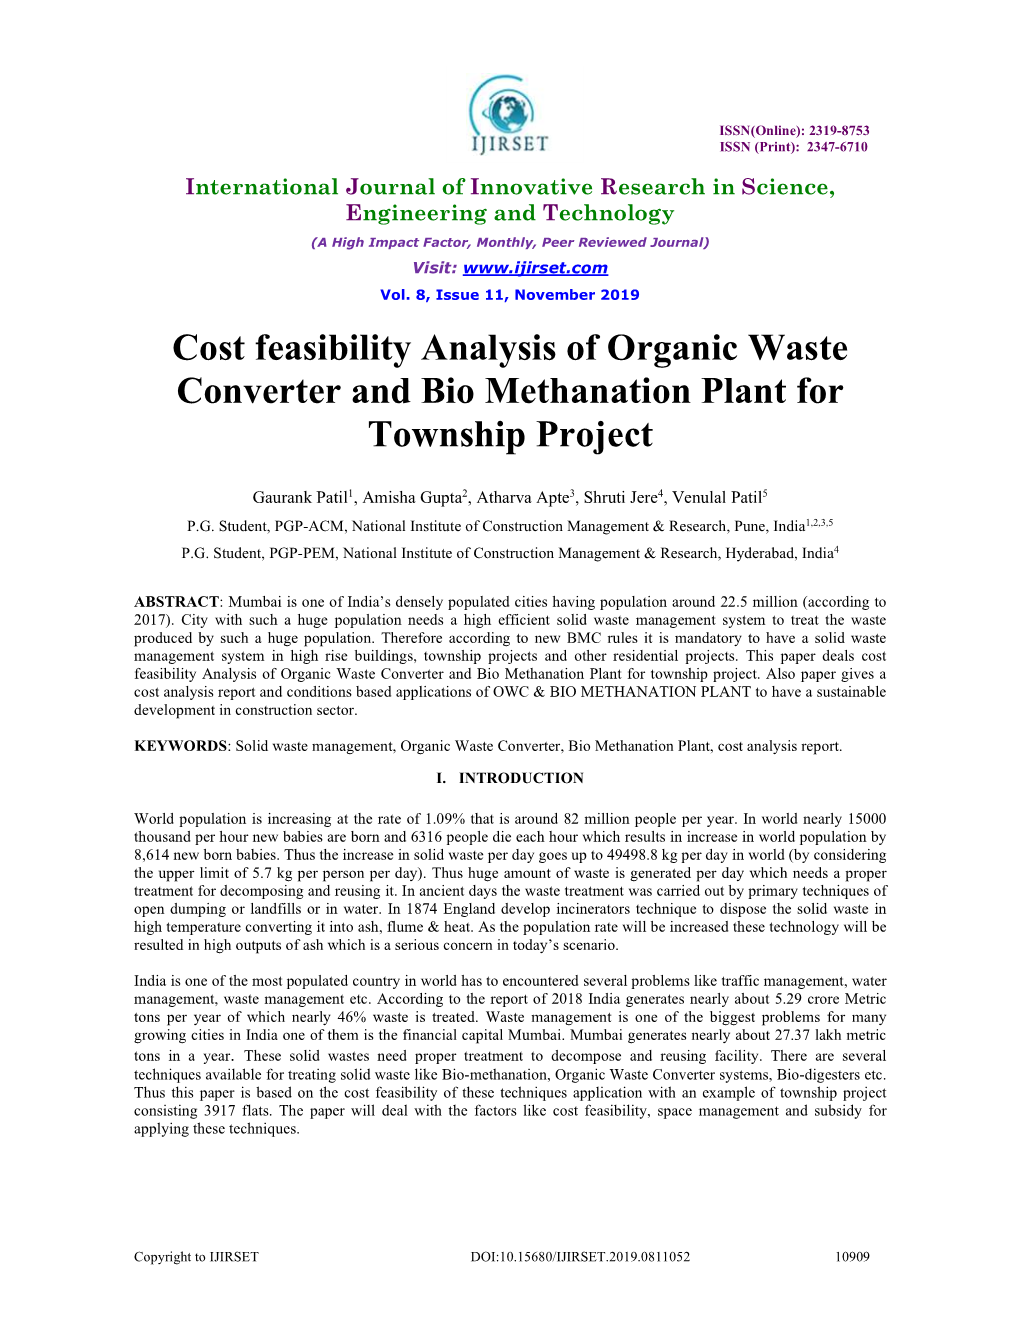 Cost Feasibility Analysis of Organic Waste Converter and Bio Methanation Plant for Township Project